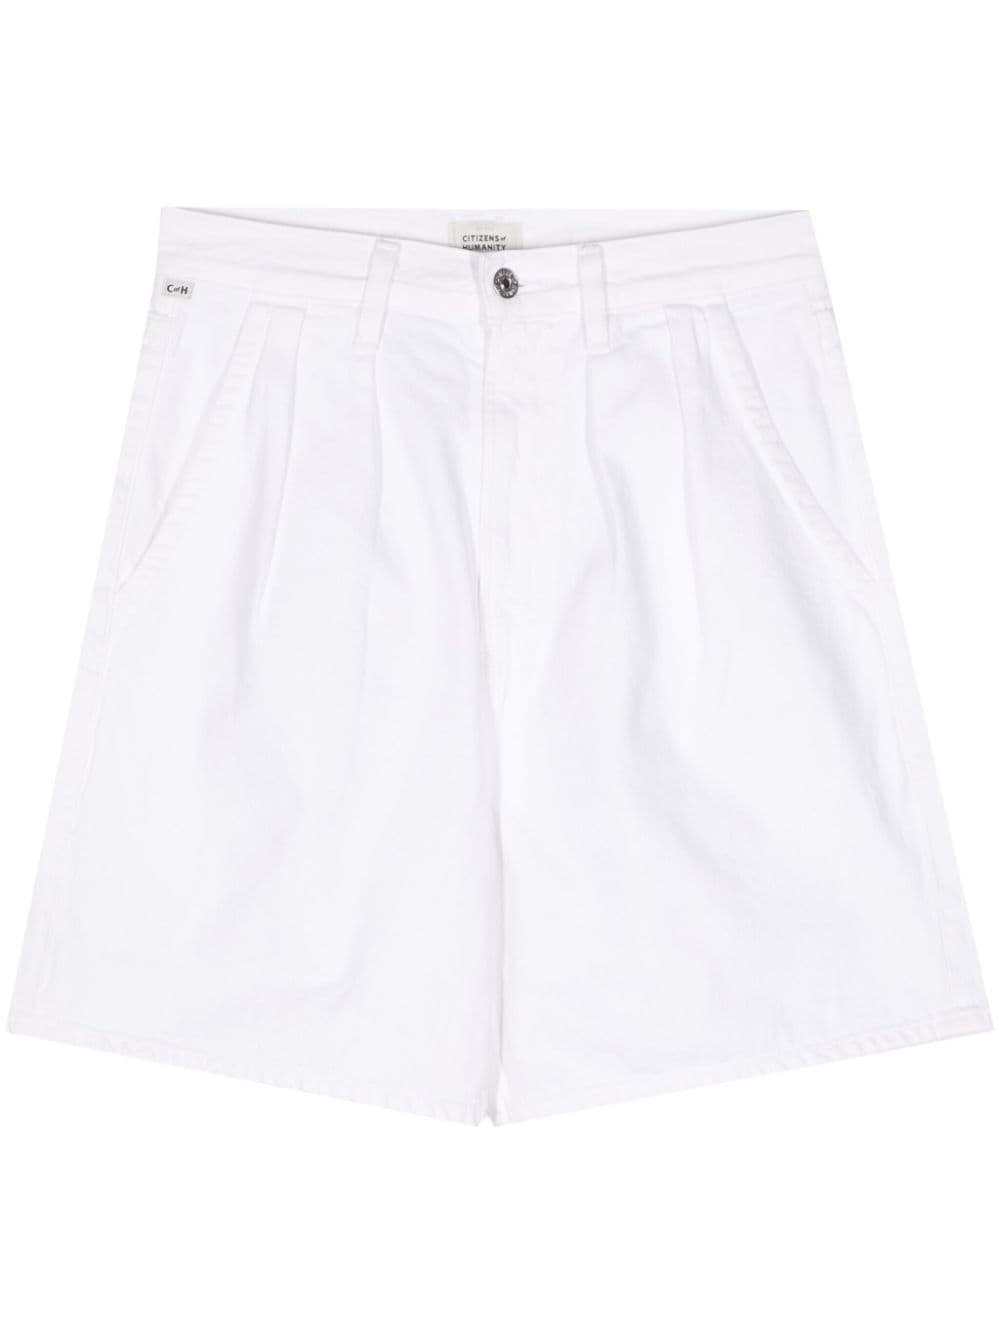 Citizens of Humanity Maritzy cotton shorts - White von Citizens of Humanity